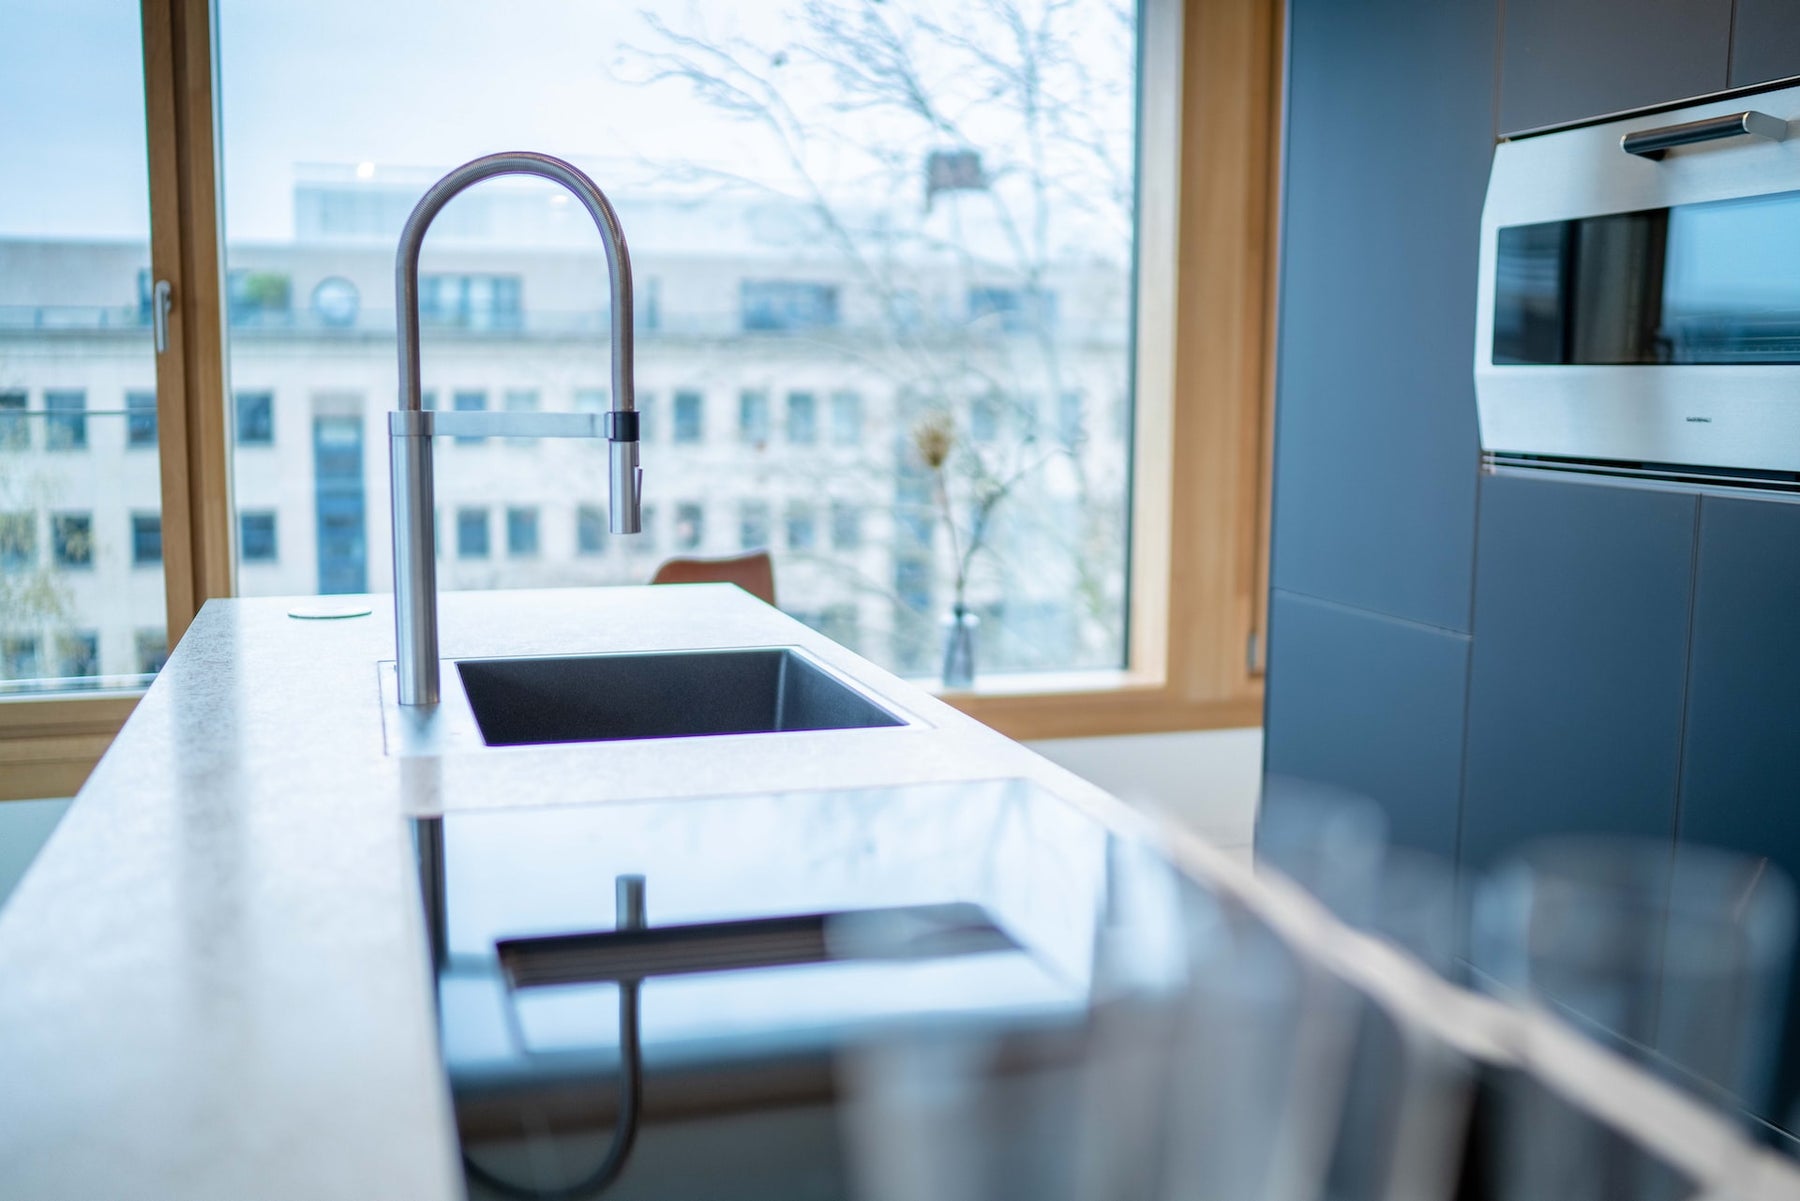 6 best kitchen faucets for your kitchen in 2022